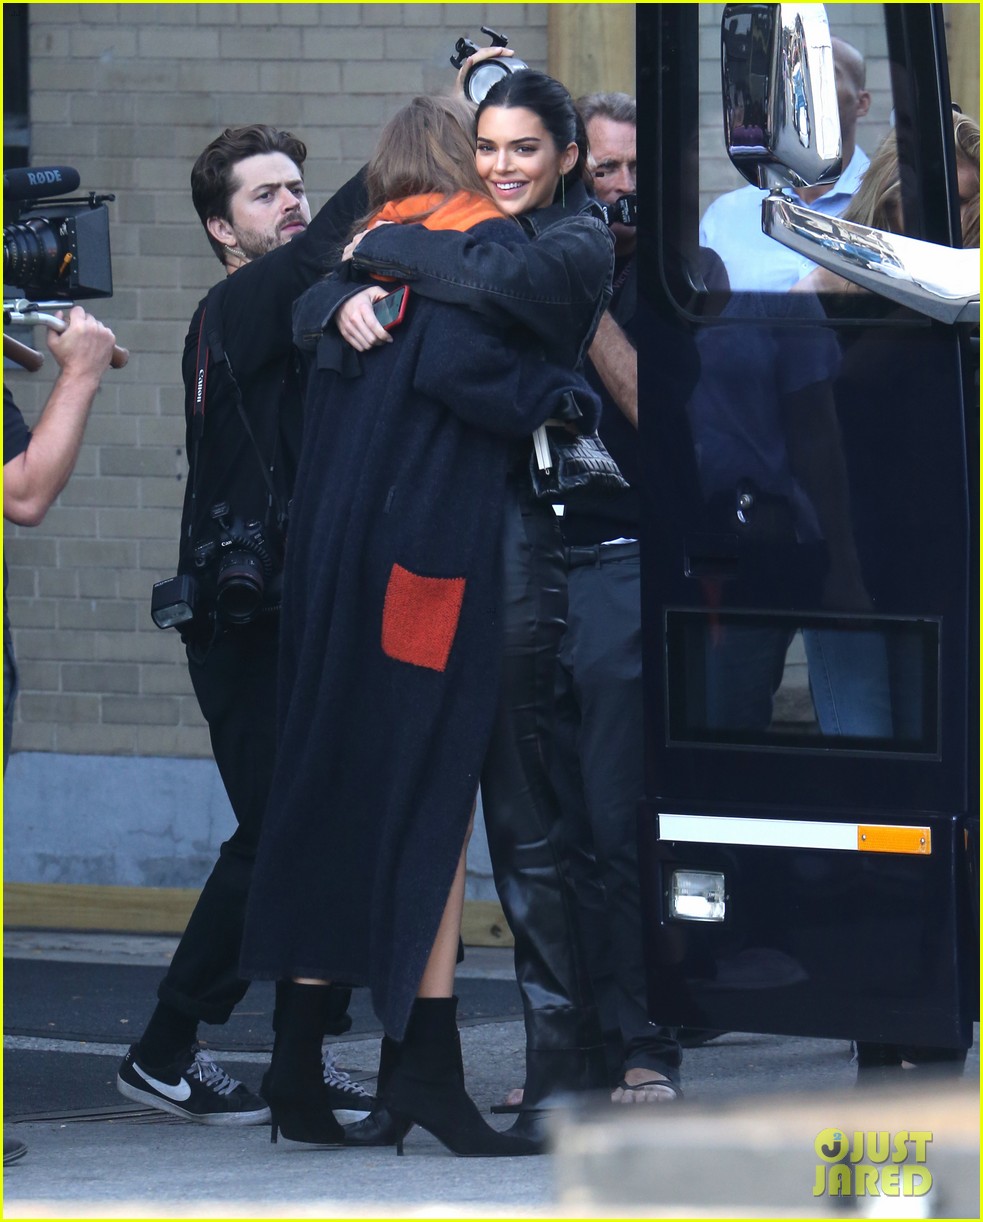 gigi hadid and kendall jenner share a hug outside of victorias secret fashion show rehearsals 07